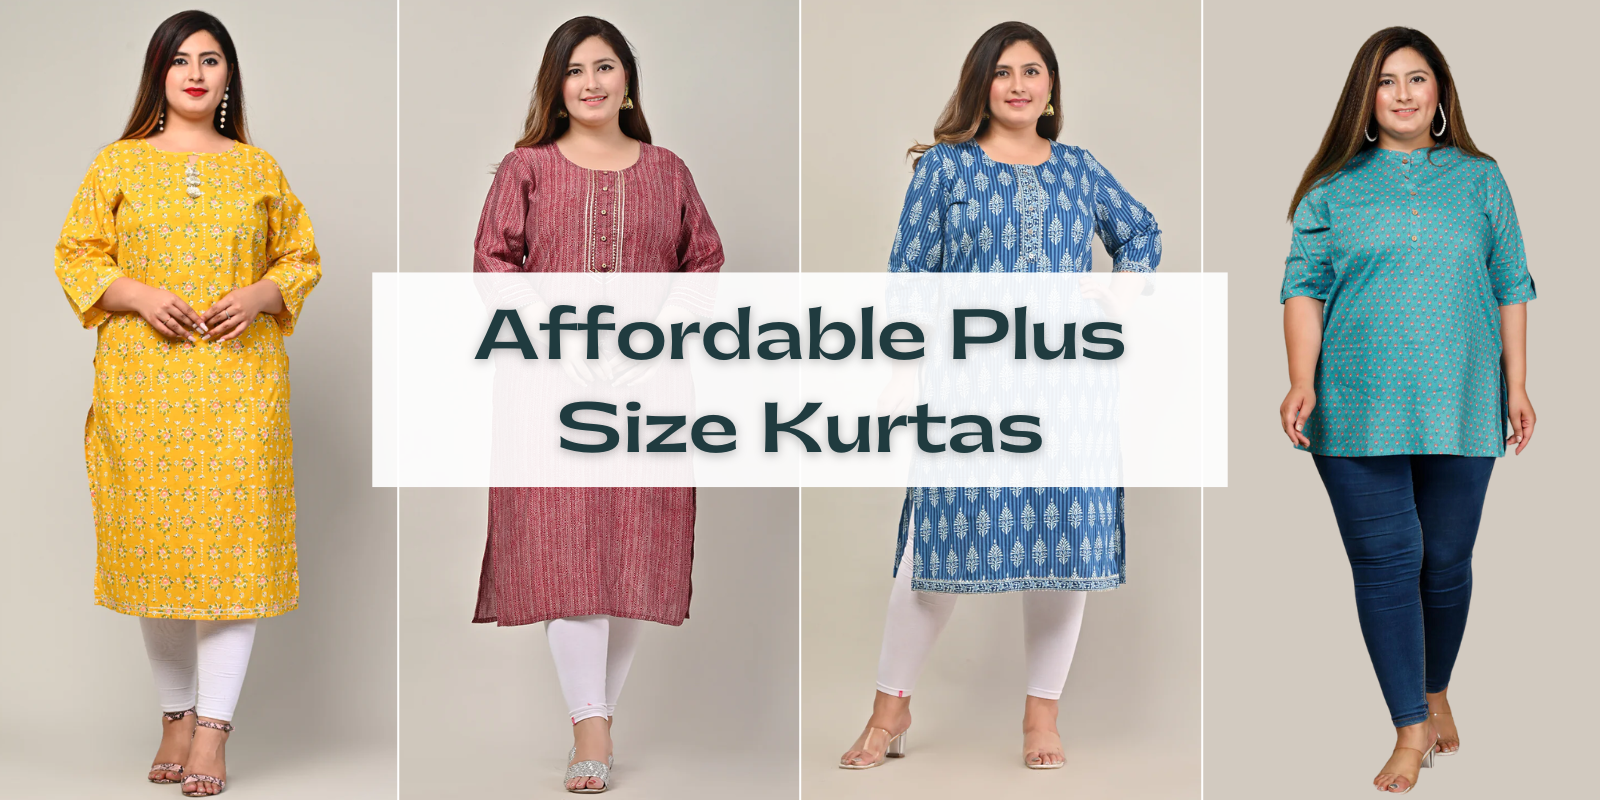 Affordable Plus Size Kurtas You Don't Want to Miss